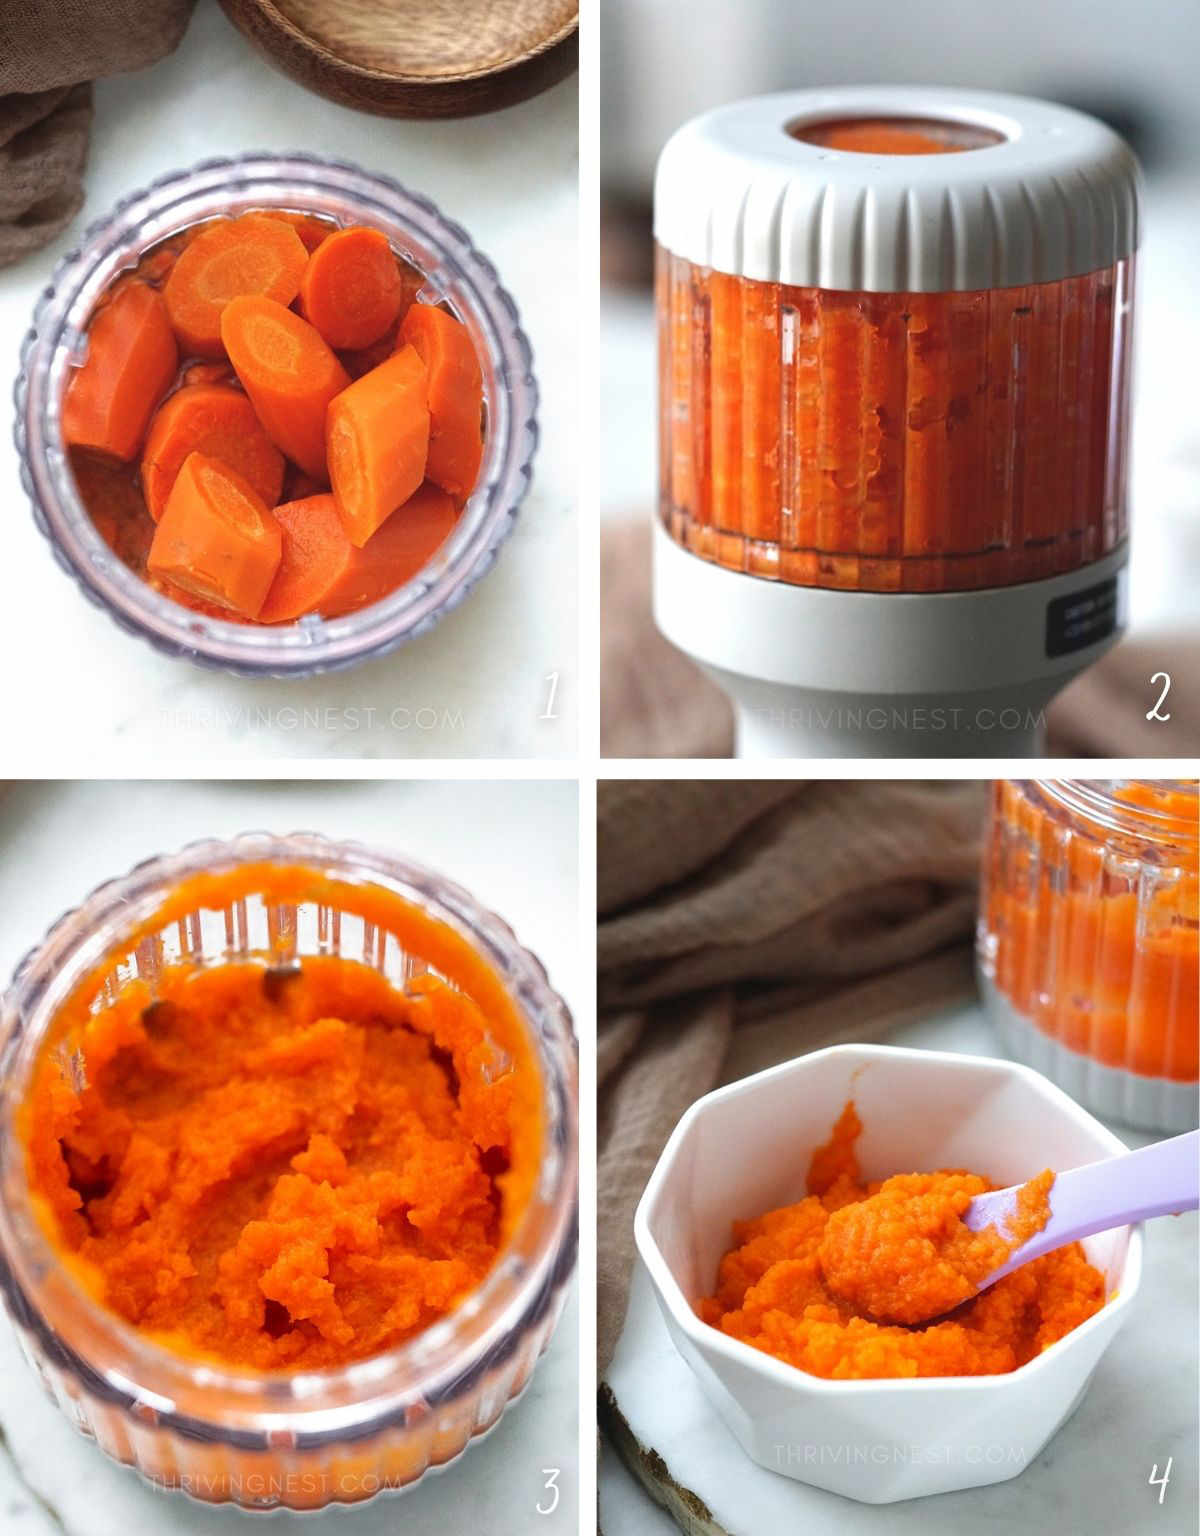 Process shots: how to make carrot puree for babies 6 months and up.